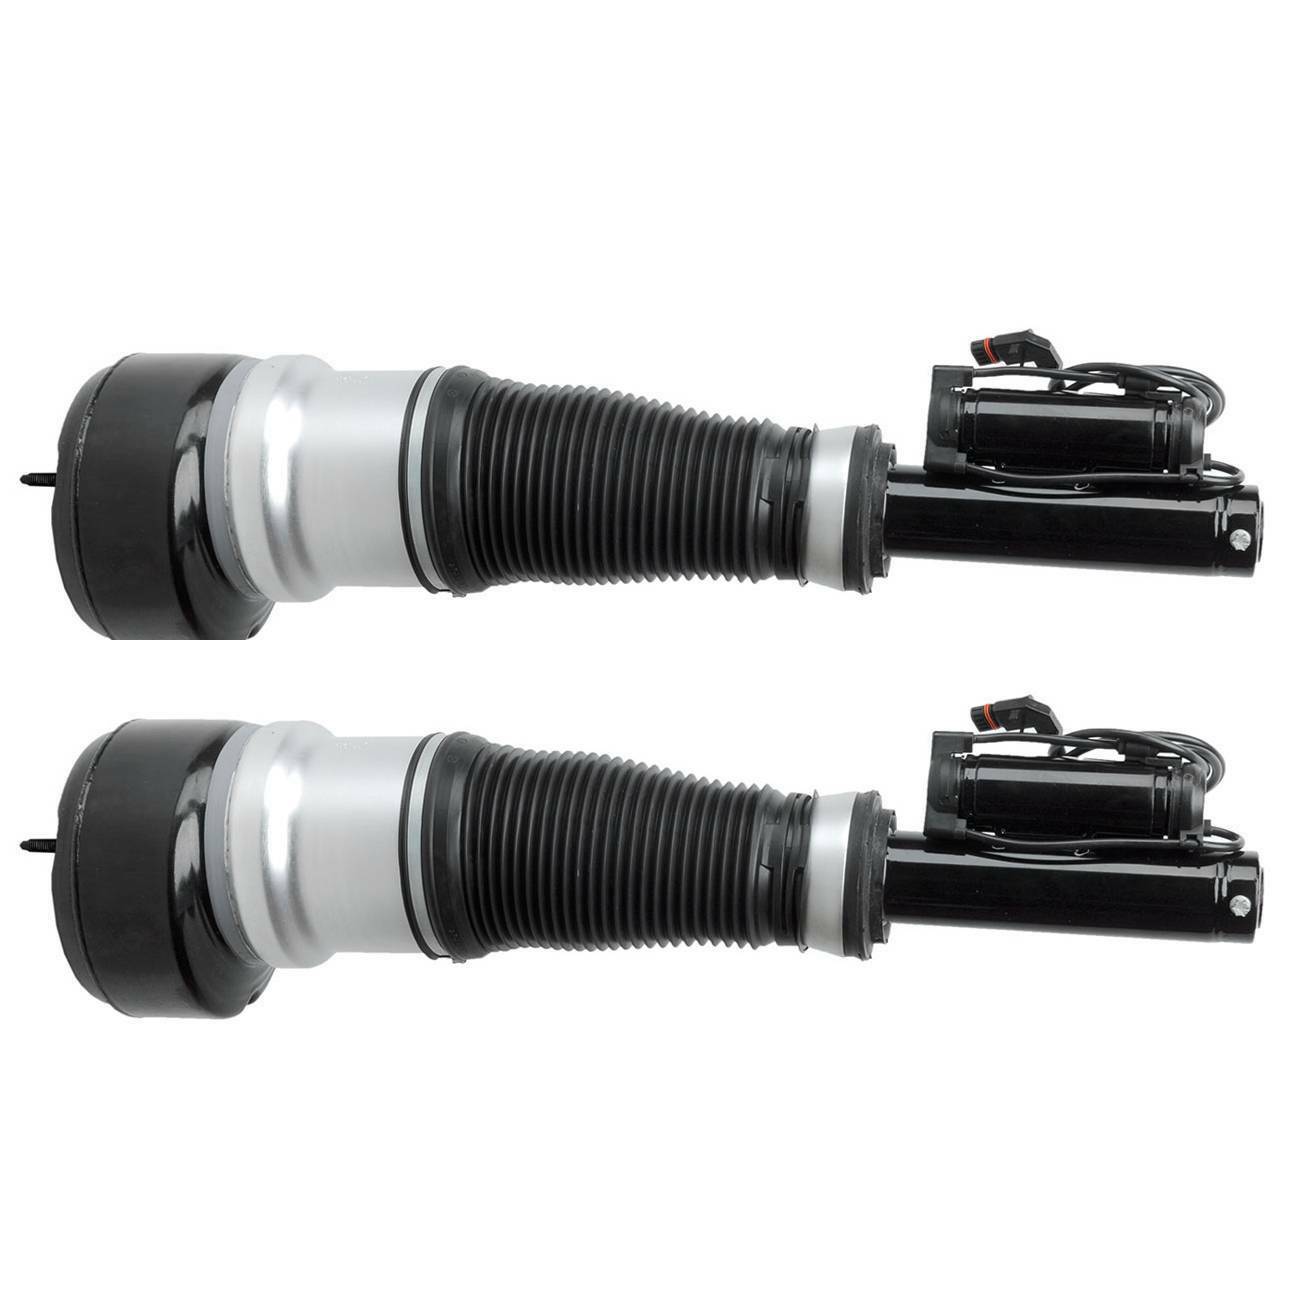 2 x Front Air Suspension Shock Strut for Mercedes W221 S350 S400 S450 S500 S600